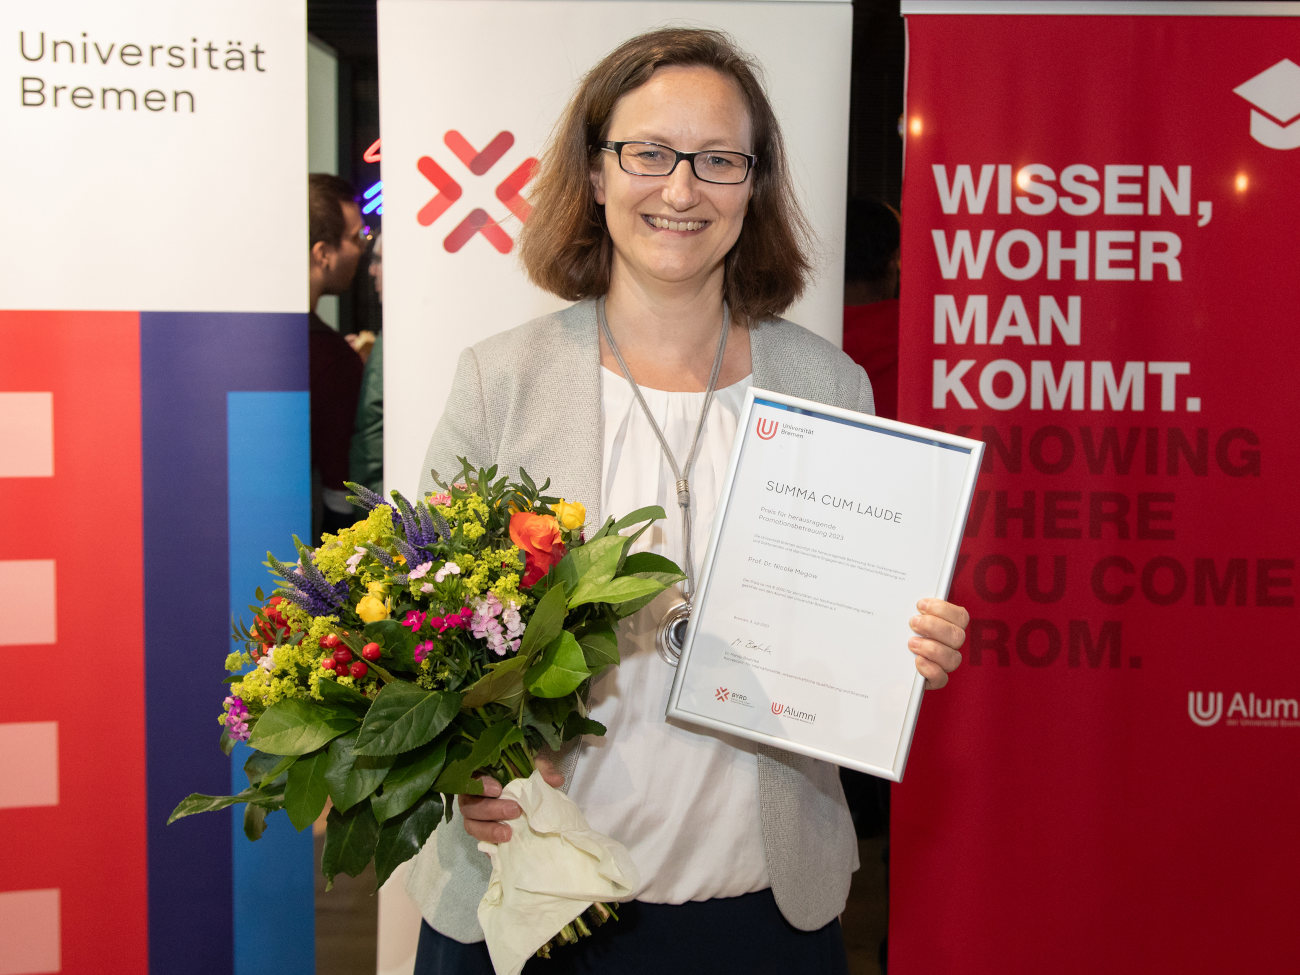 Nicole Megow with a bouquet of flowers in one hand and the certificate for outstanding doctoral supervision in the other.